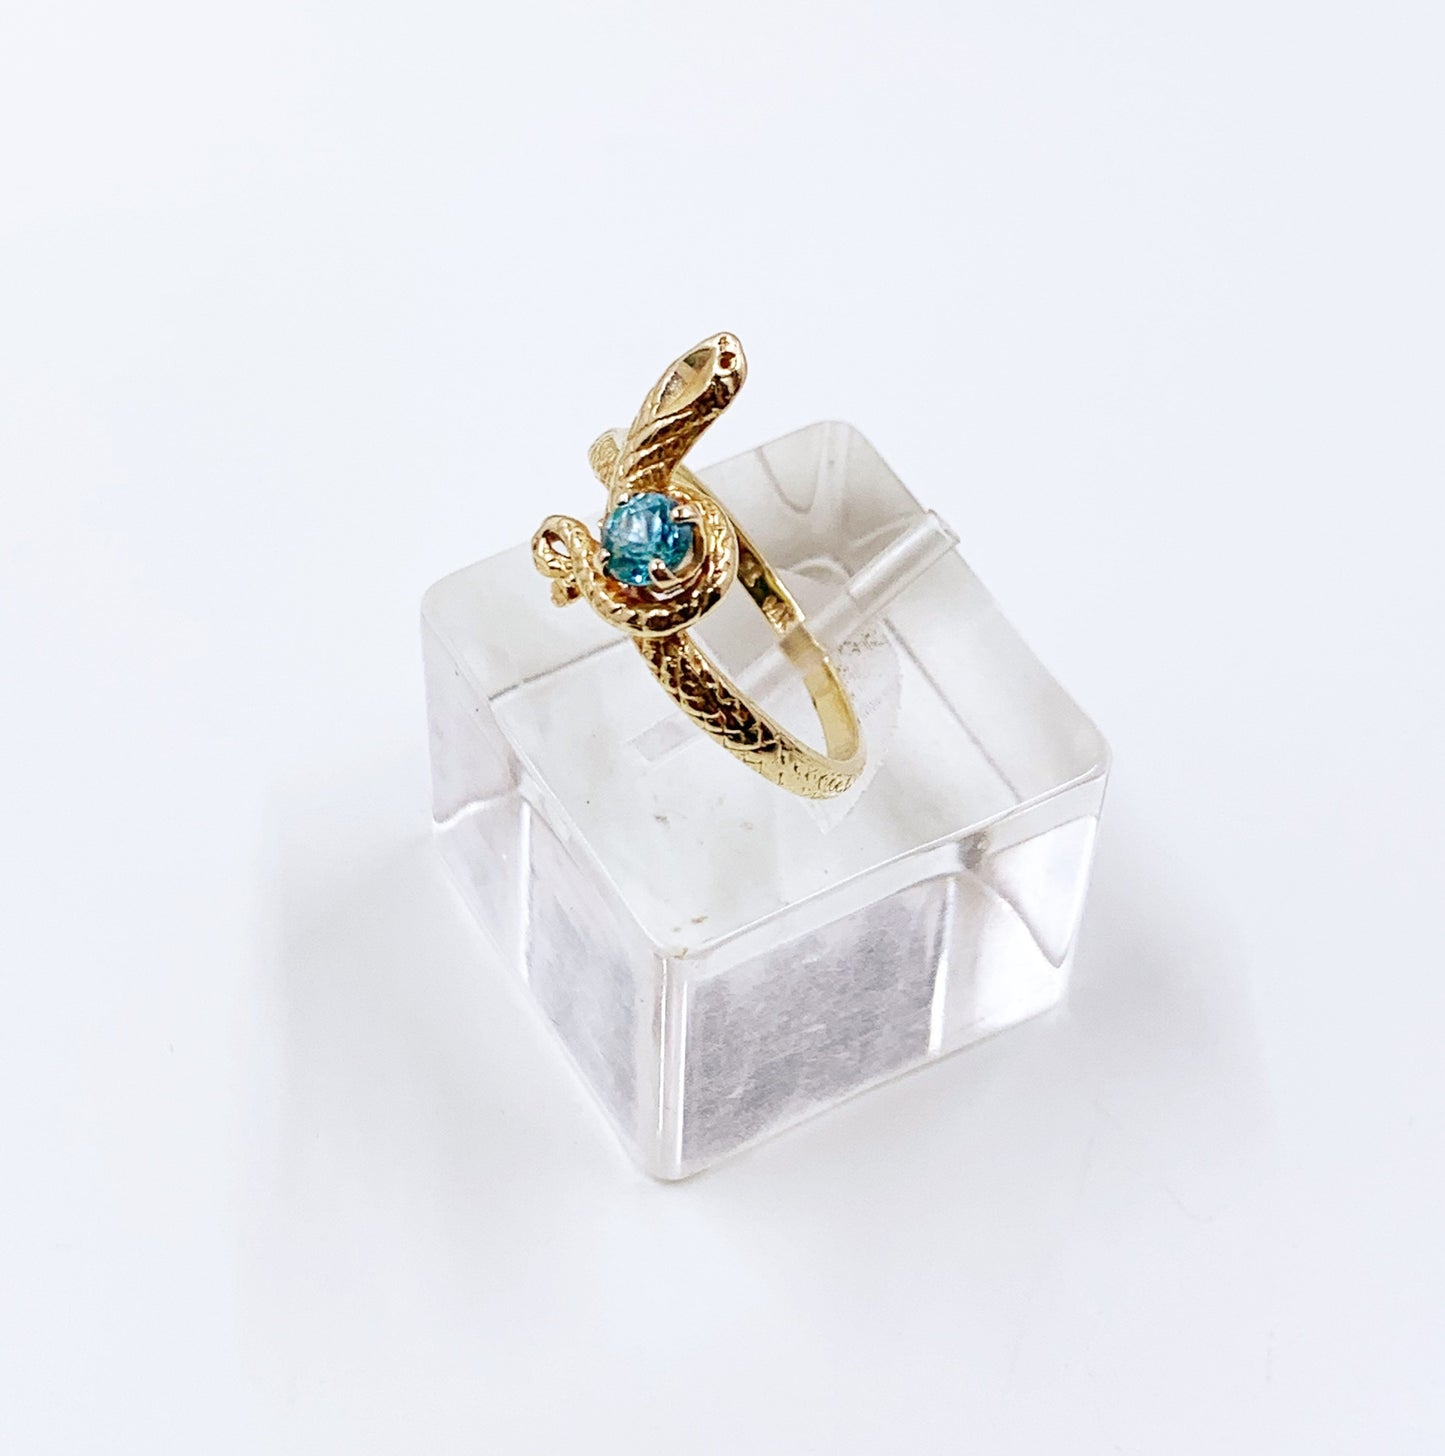 Vintage 14K Gold and Zircon Coiled Snake Ring | Size 7